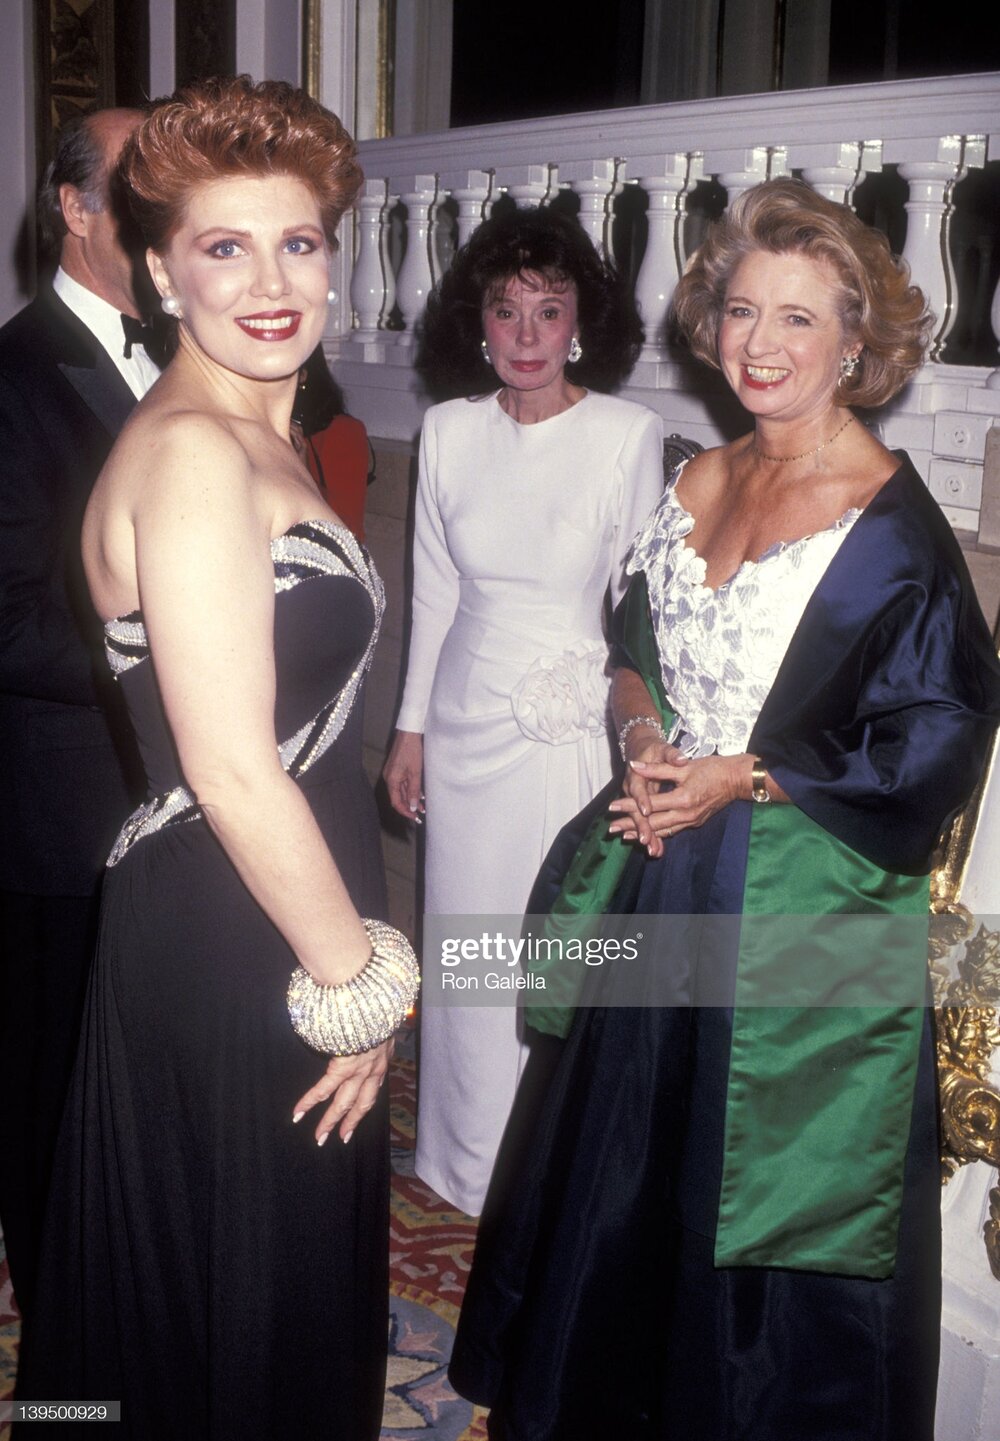 Georgette Mosbacher and Shirley Lord Rosenthal attend the Winternight 1991 Gala to Benefit Lighthouse International on November 18, 1991 at The Plaza Hotel in New York City.